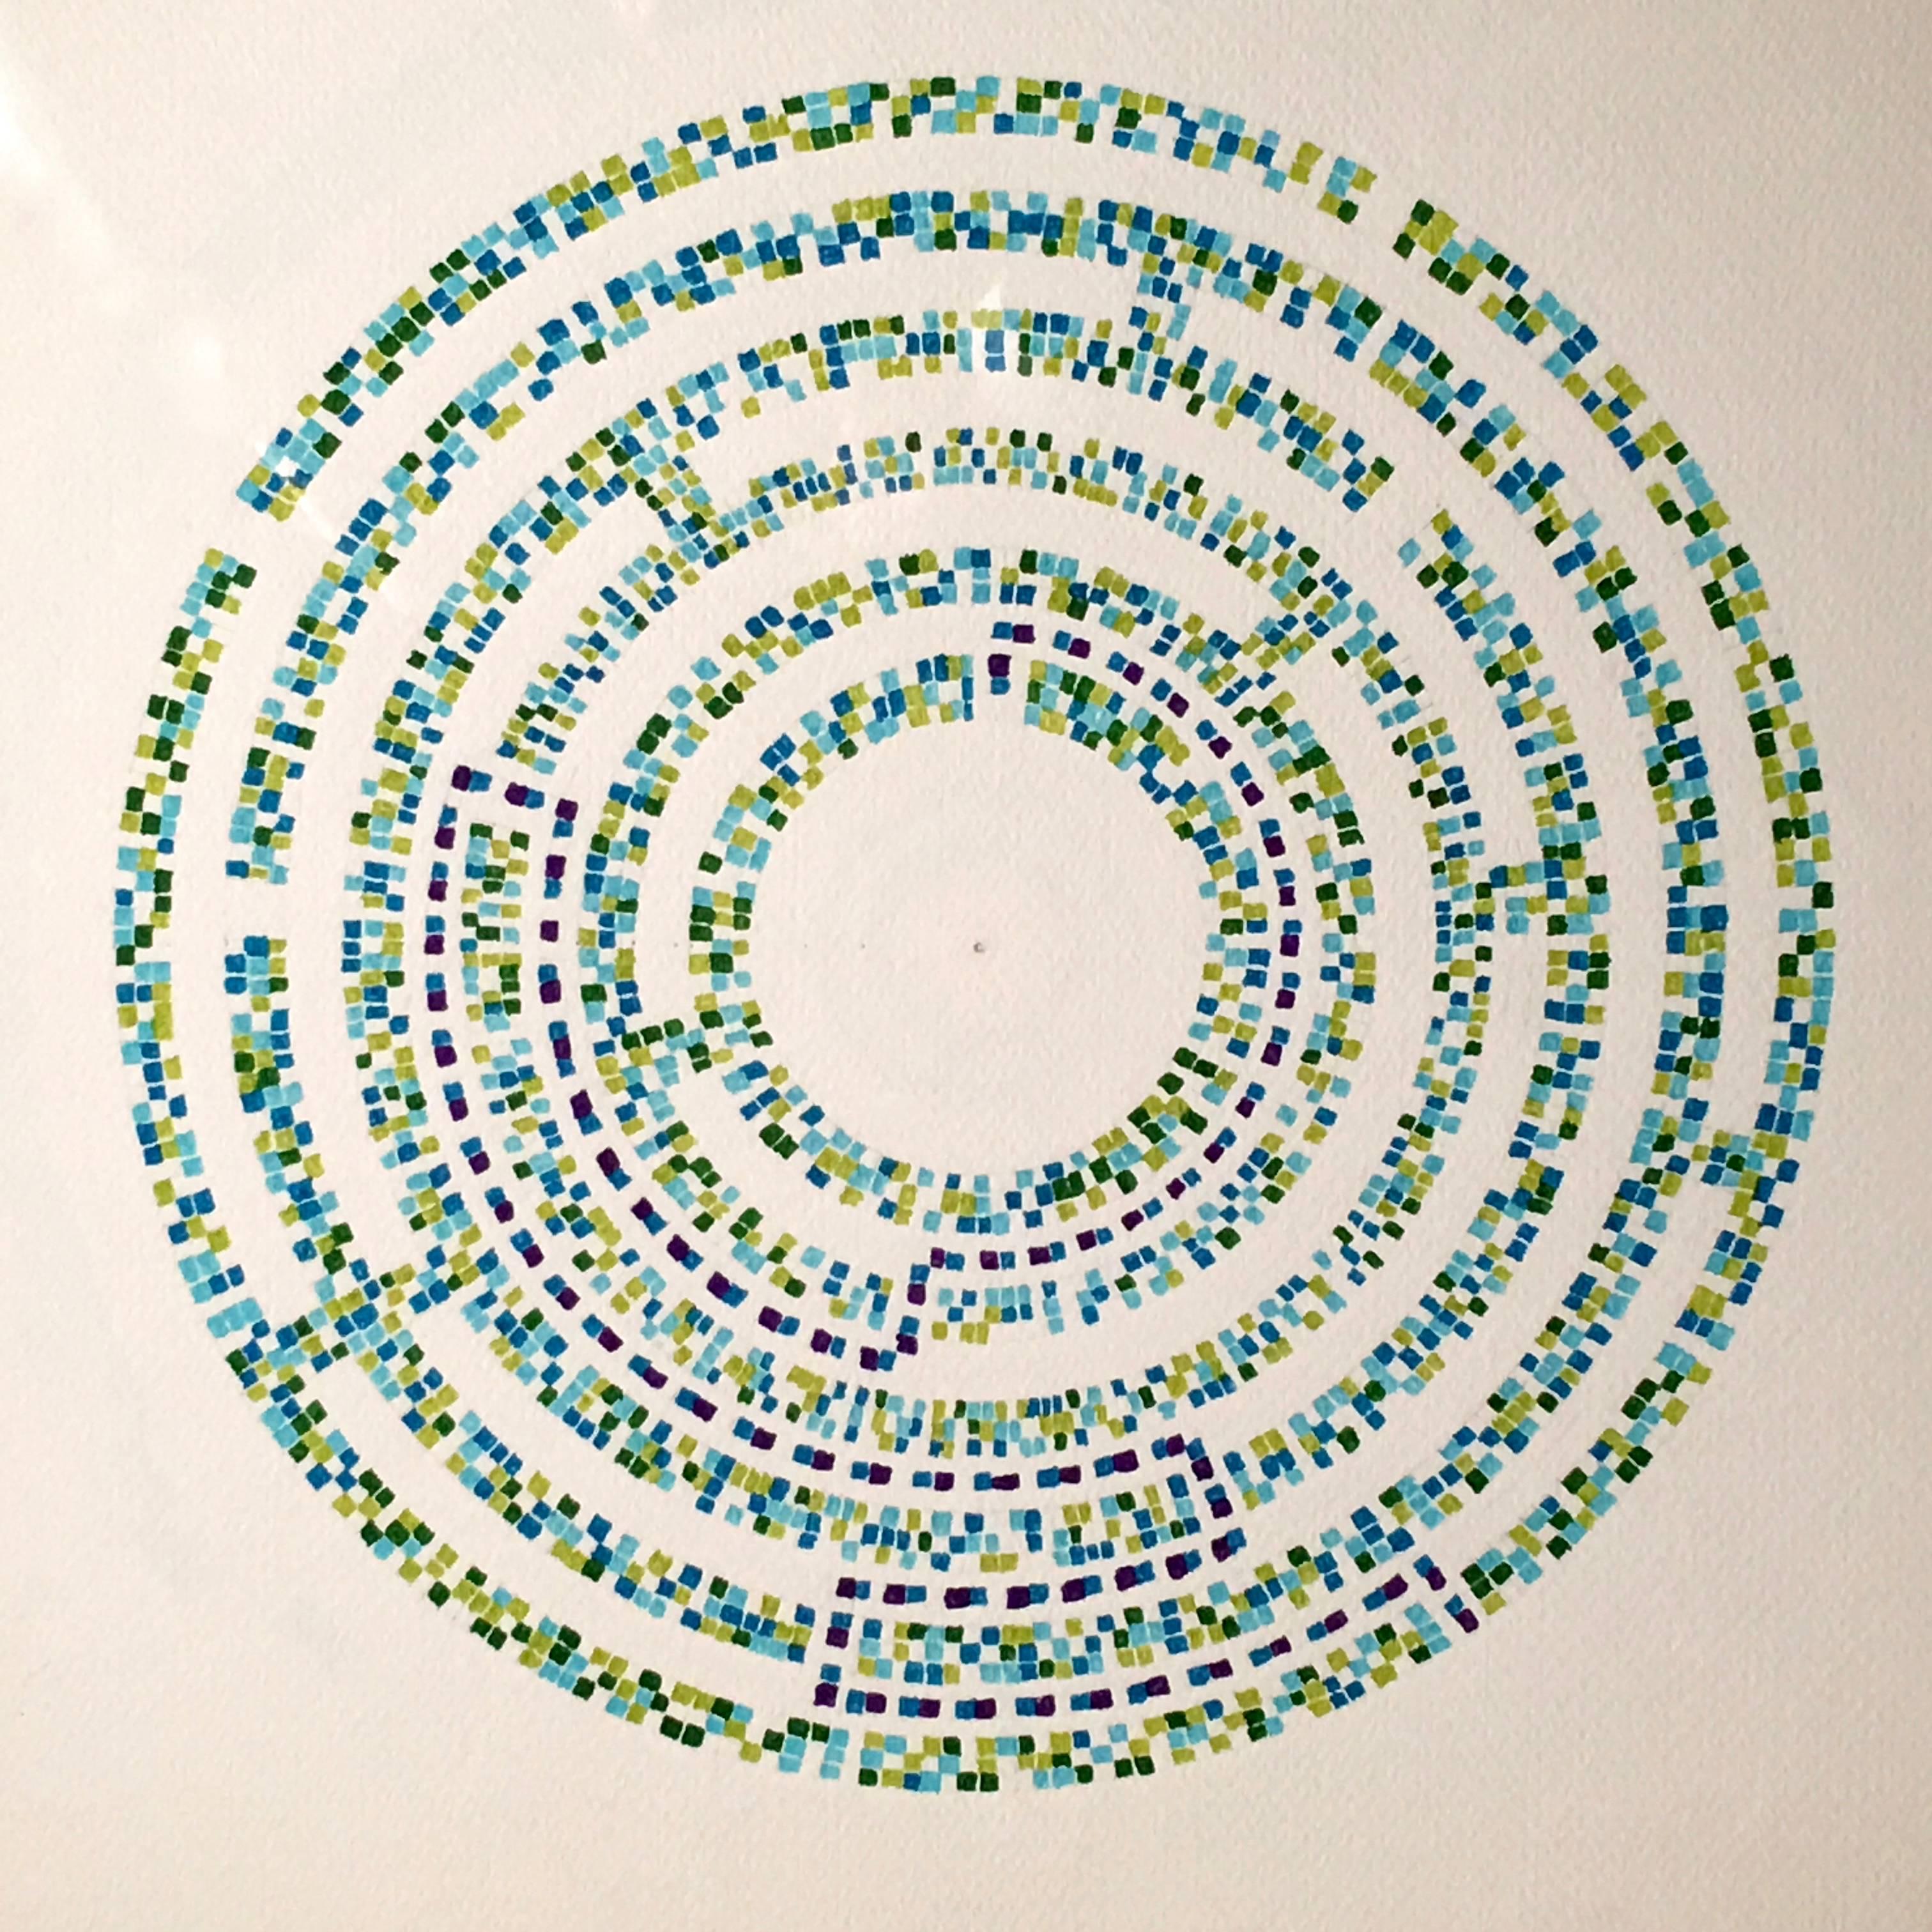 American Stewart Ross James Blue and Green Circle Geometric Watercolor